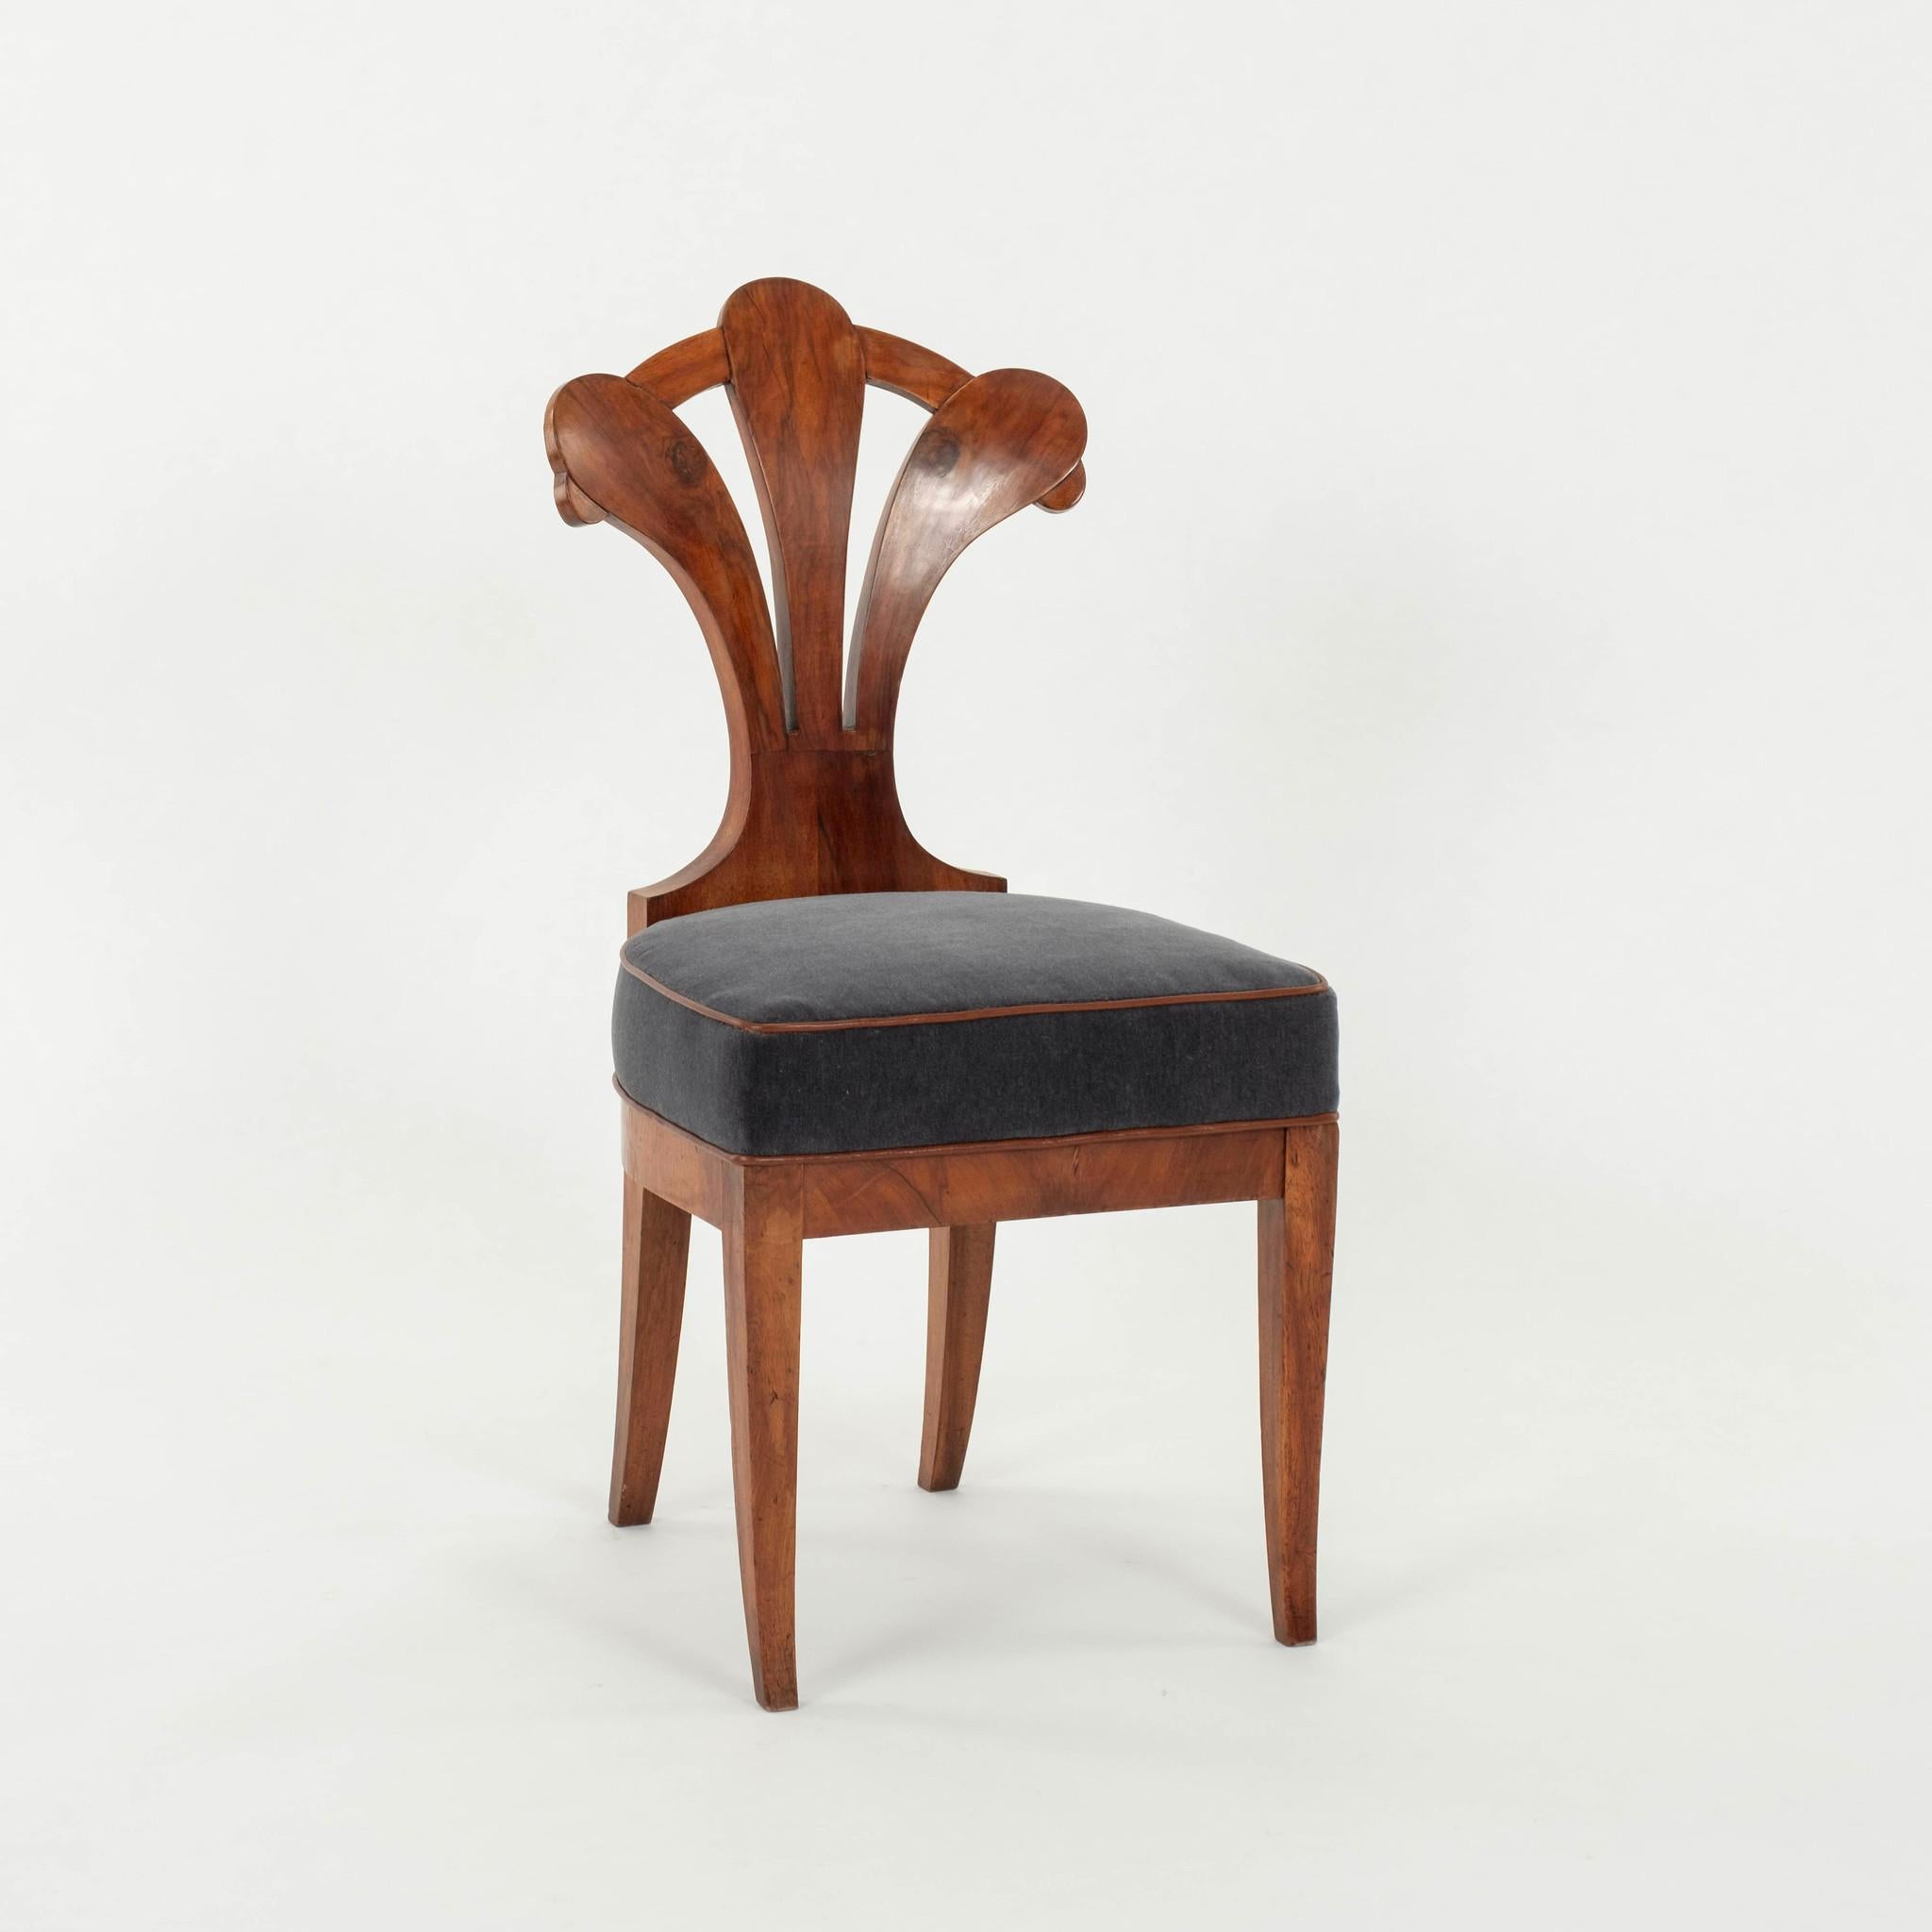 Early 19th Century Swedish Biedermeier chair, beautiful hardwood frame, newly upholstered seat with a soldier blue gray mohair and cognac leather welt.